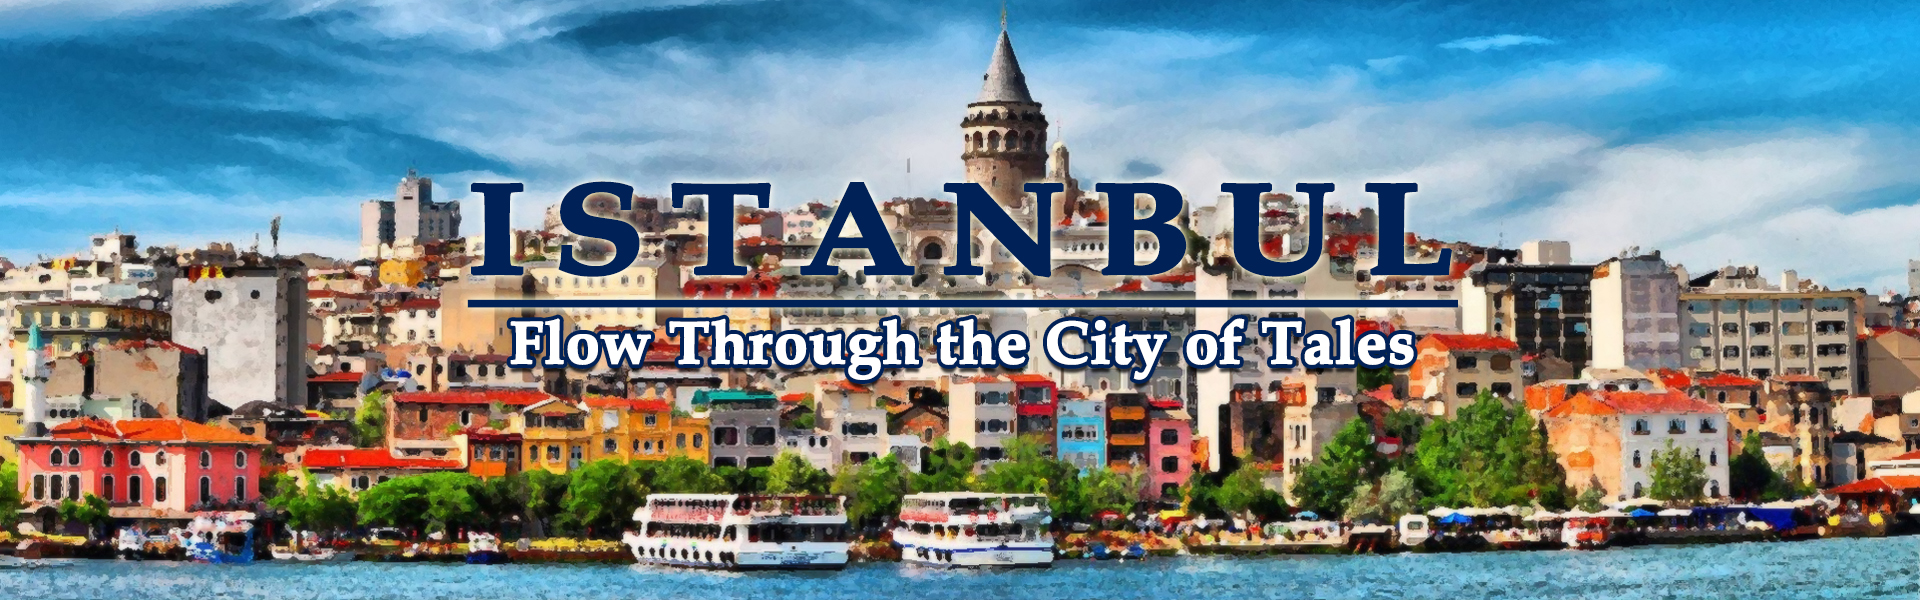 Banner-1920x600---ISTANBUL